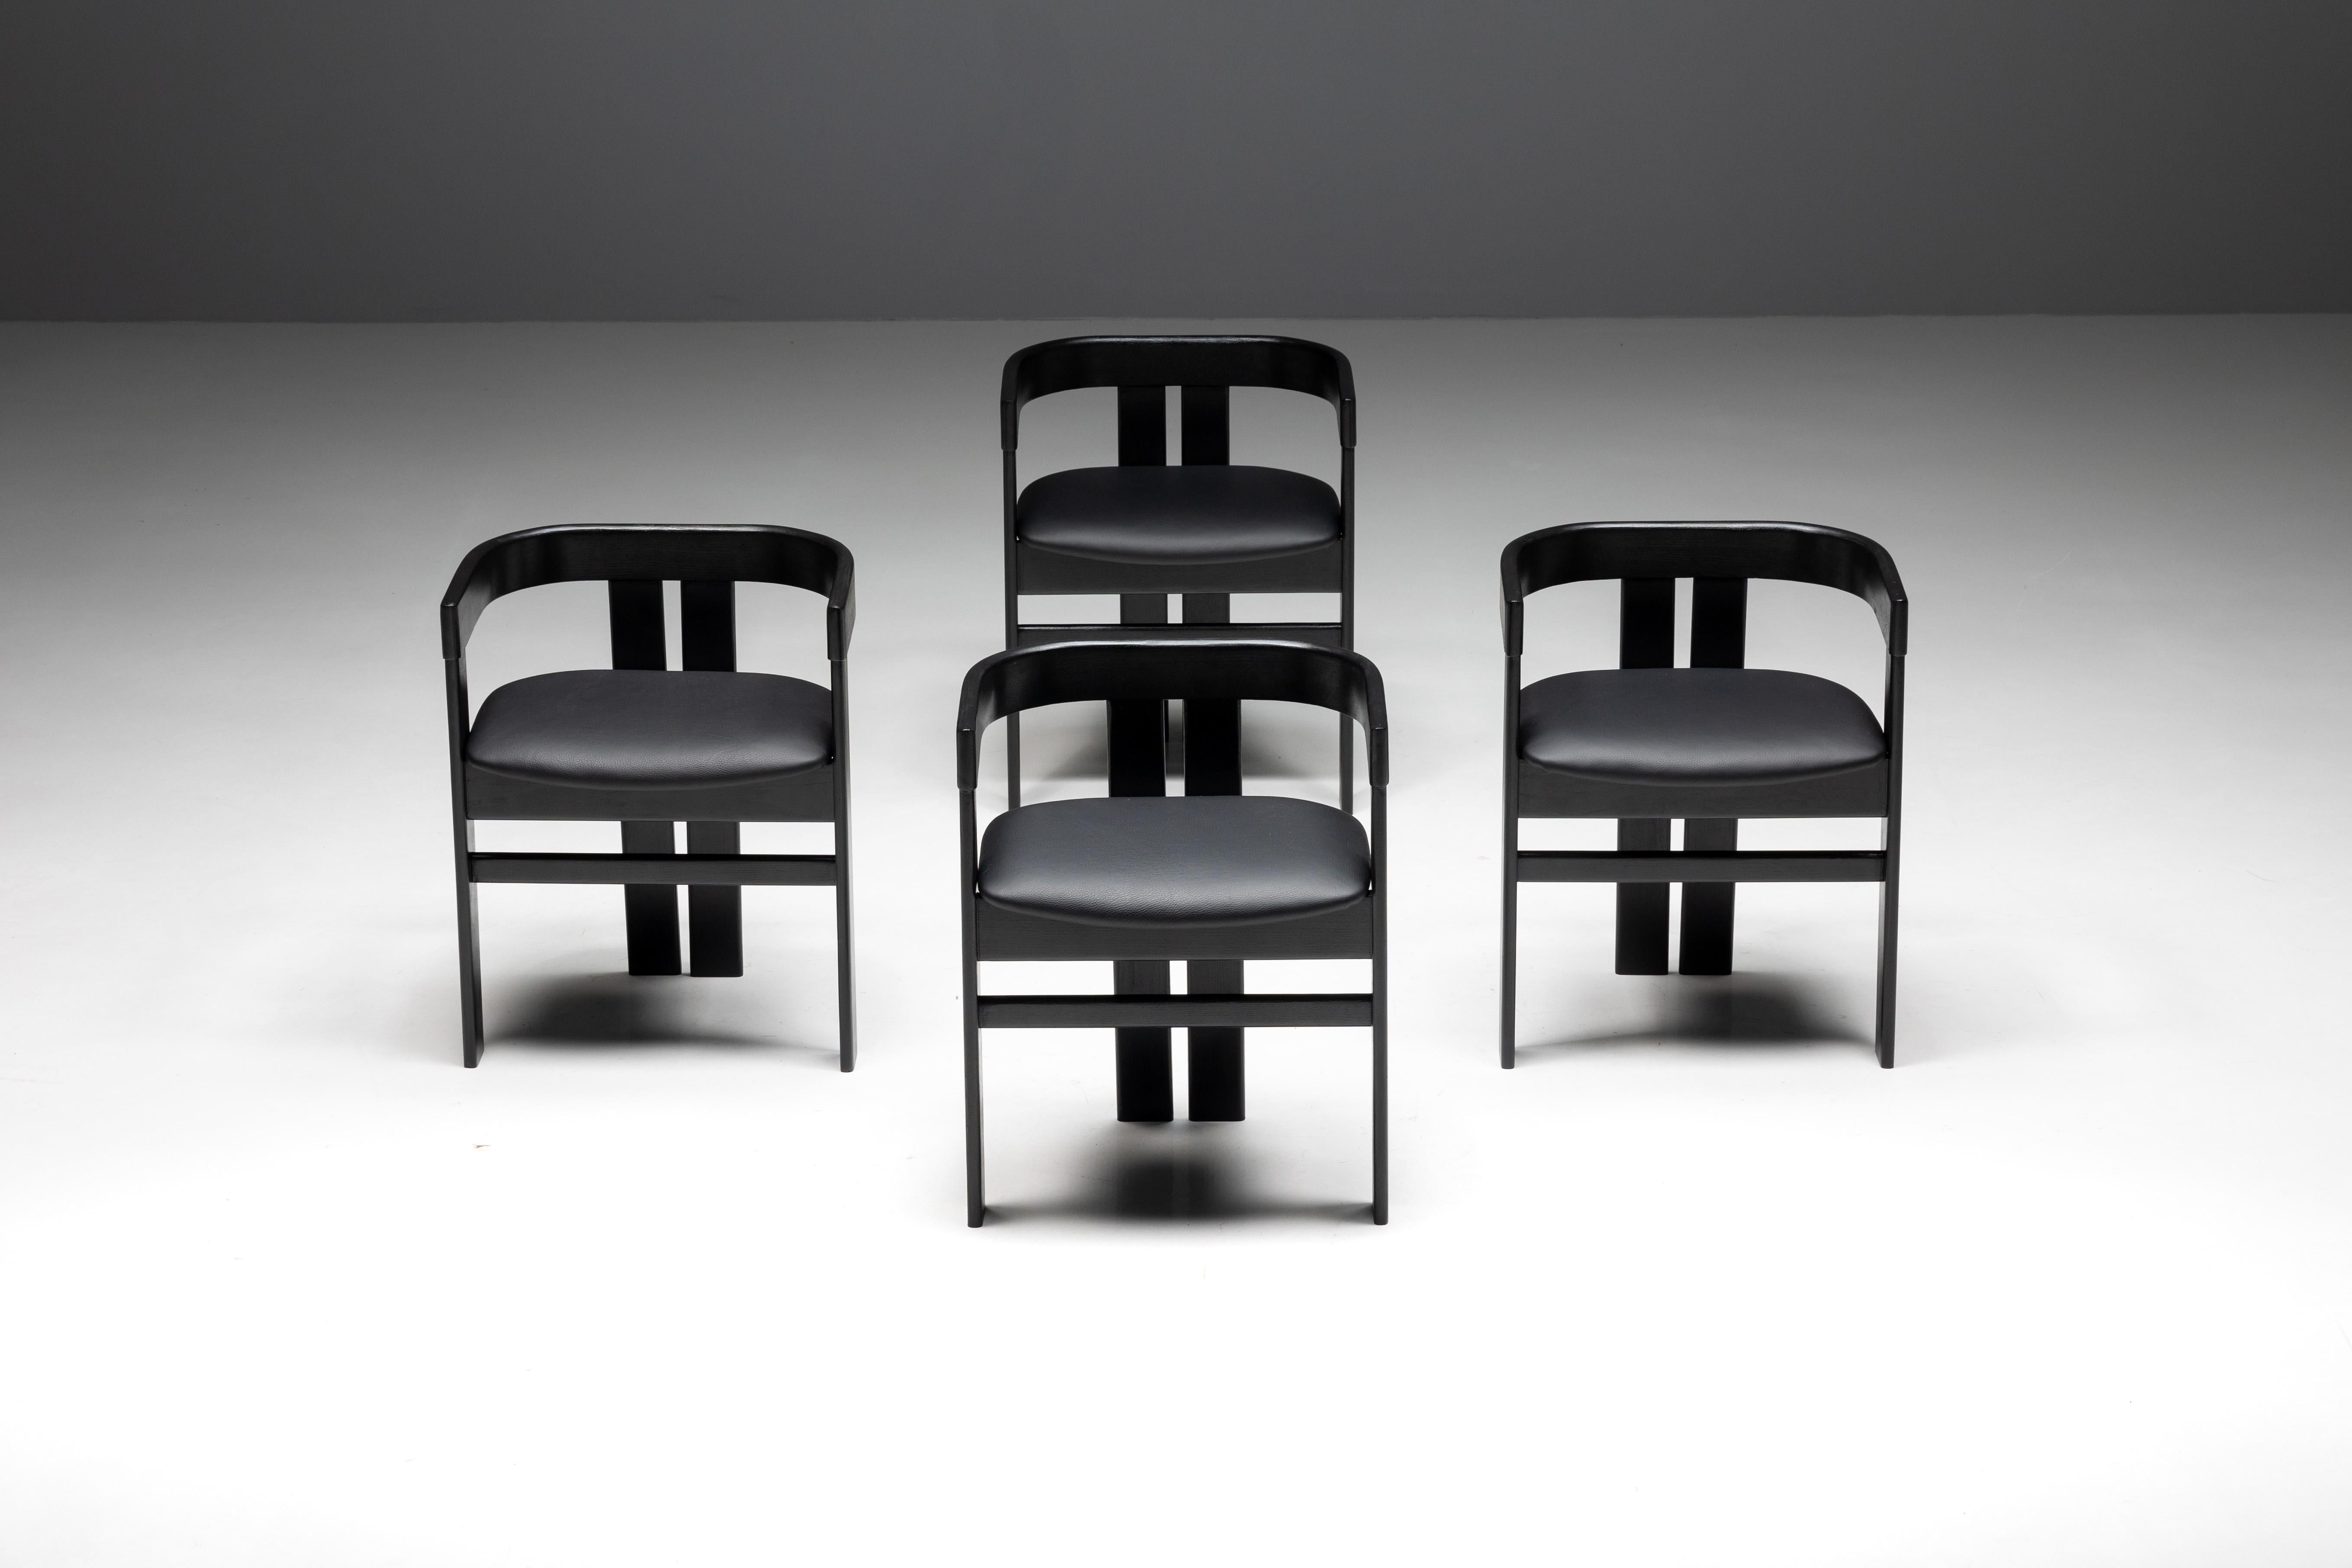 Italian Pigreco Chairs by Tobia Scarpa for Tacchini, Italy, 1960s For Sale